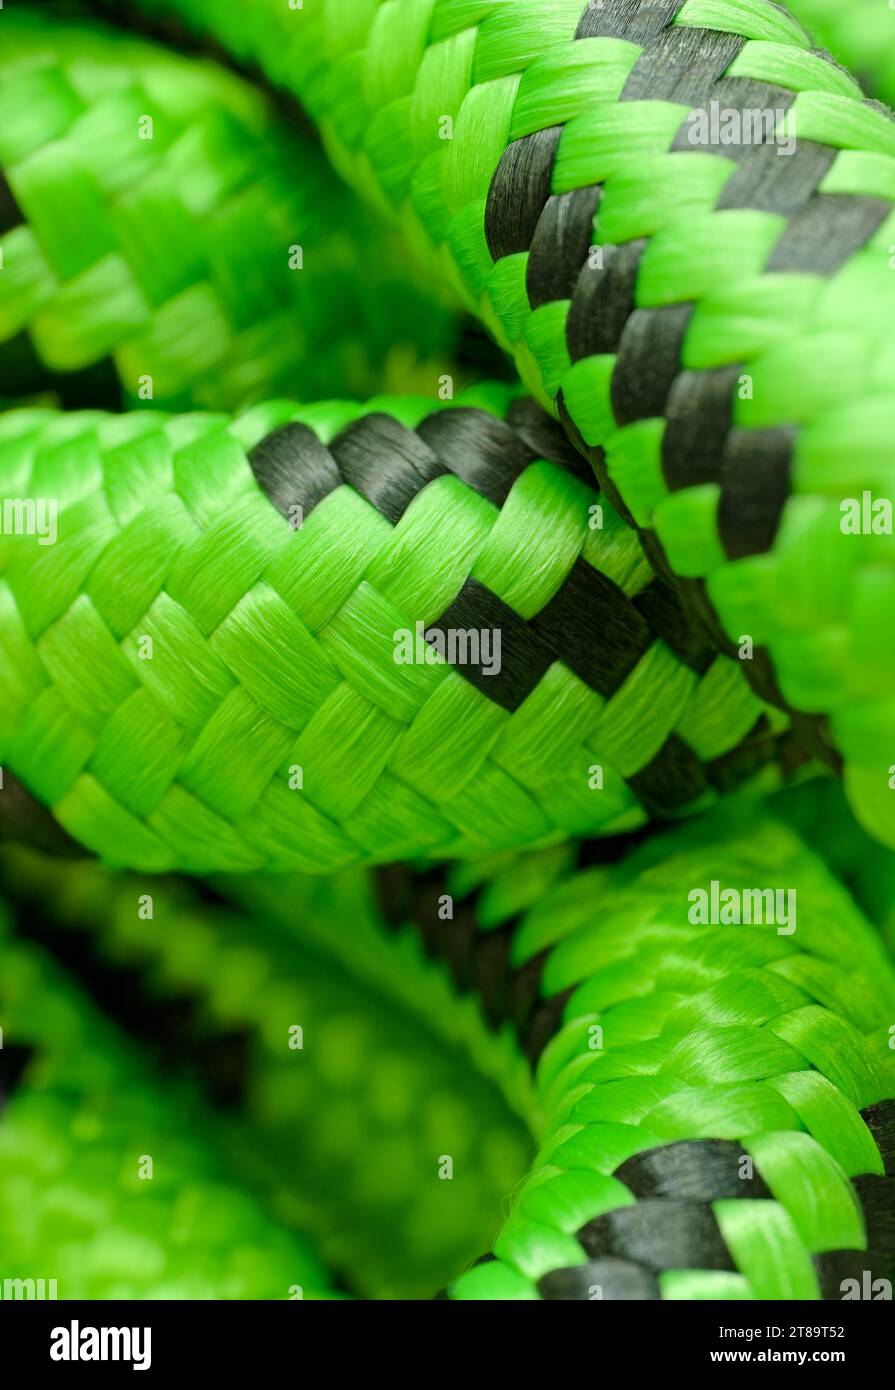 Tangled green nylon cord, close-up shot, abstract nautical or mountaineering background Stock Photo